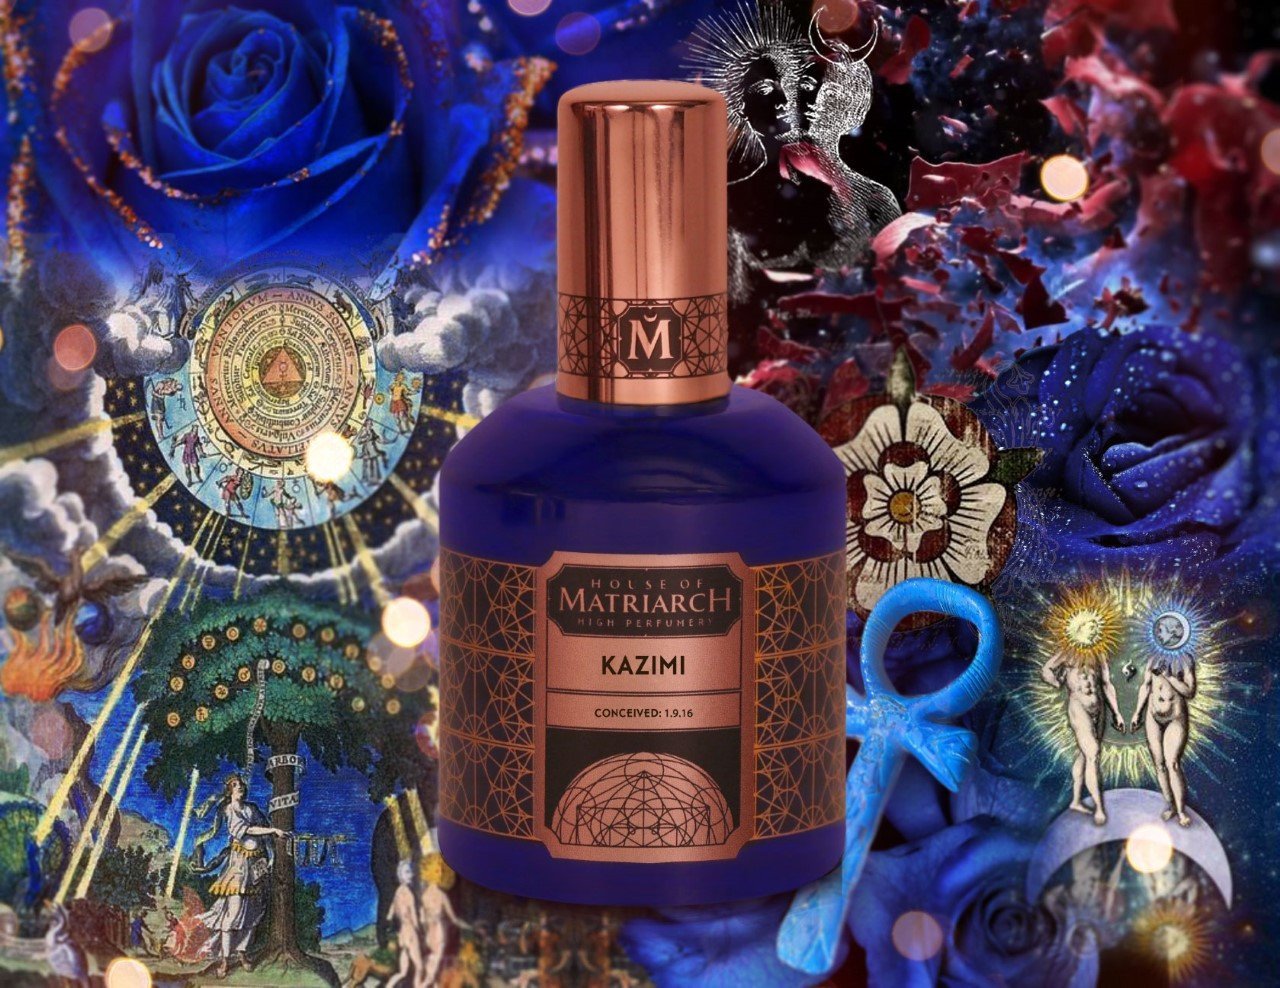 Cosmic Cloud - Perfumes - Exceptional Creations